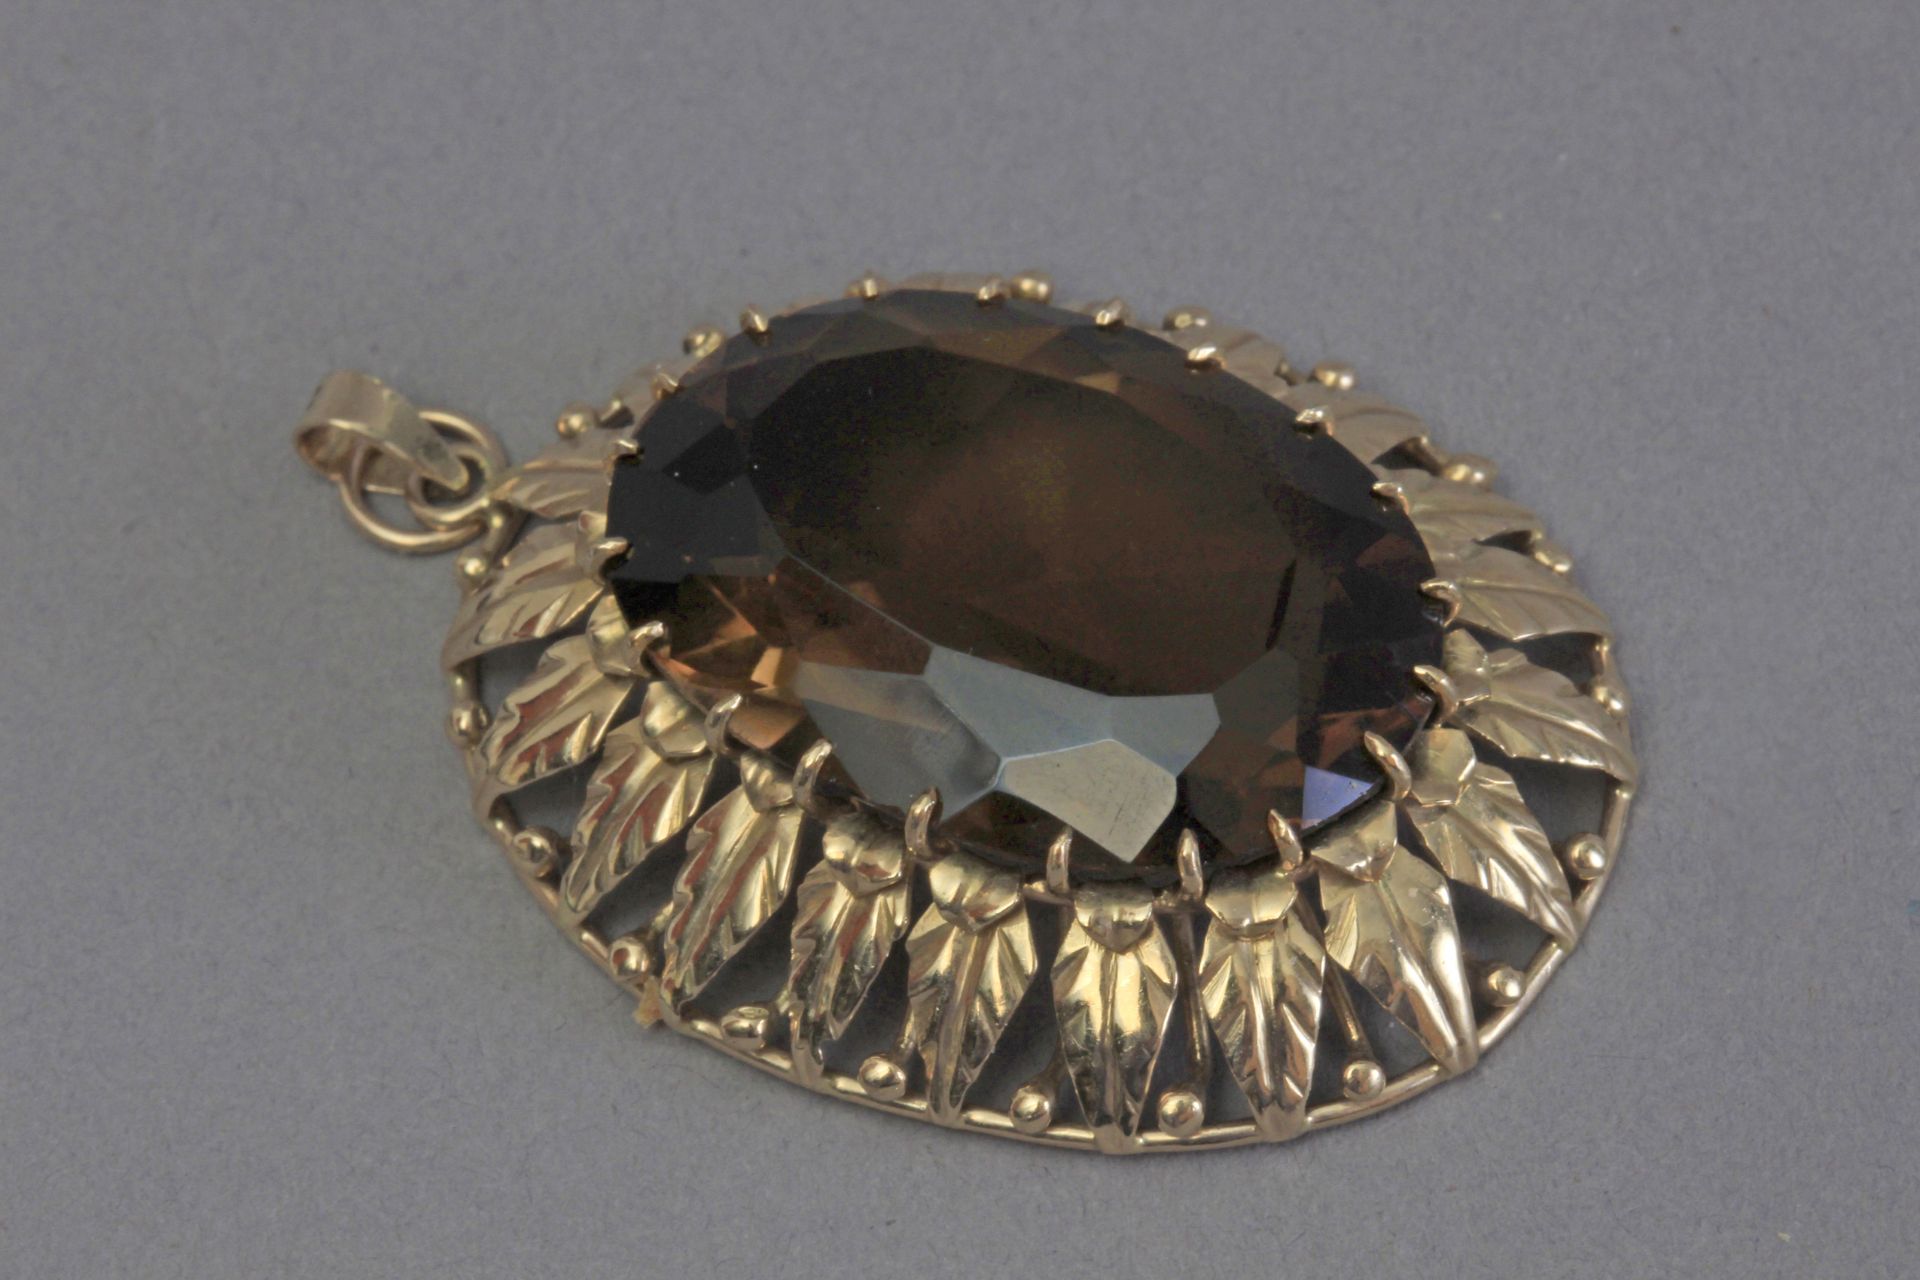 A smoky quartz pendant brooch with an 18k. yellow gold setting - Image 3 of 5